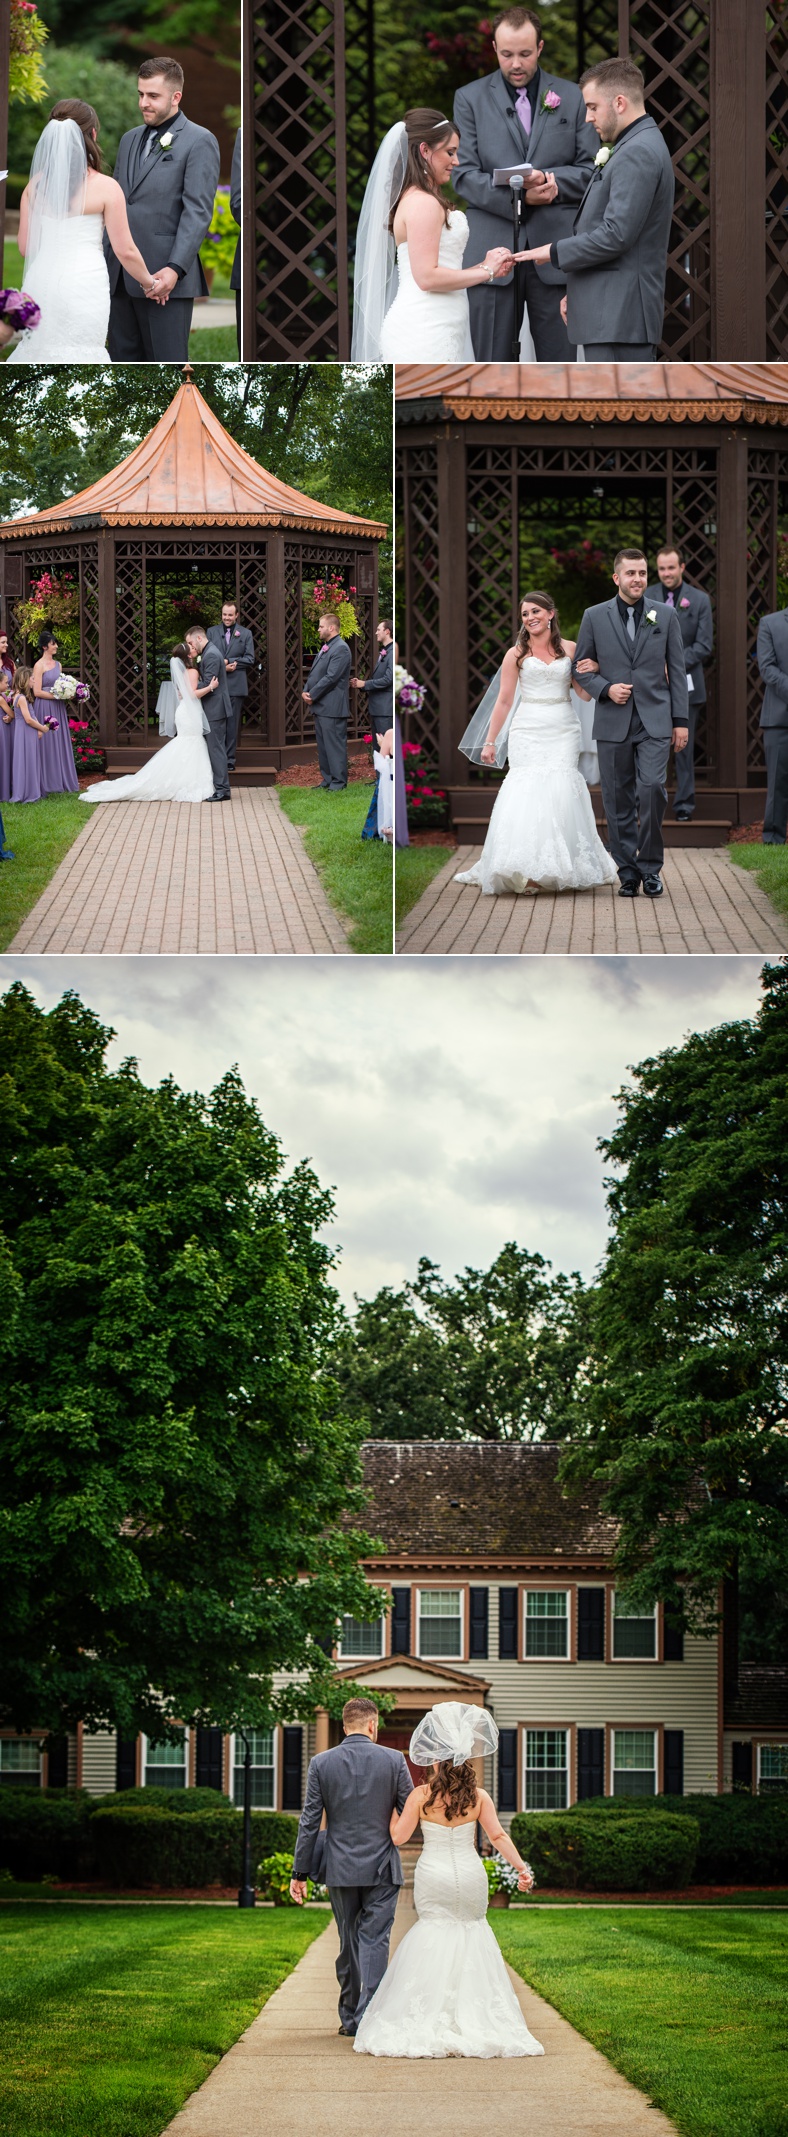 Outdoor wedding ceremony at the Dearborn Inn